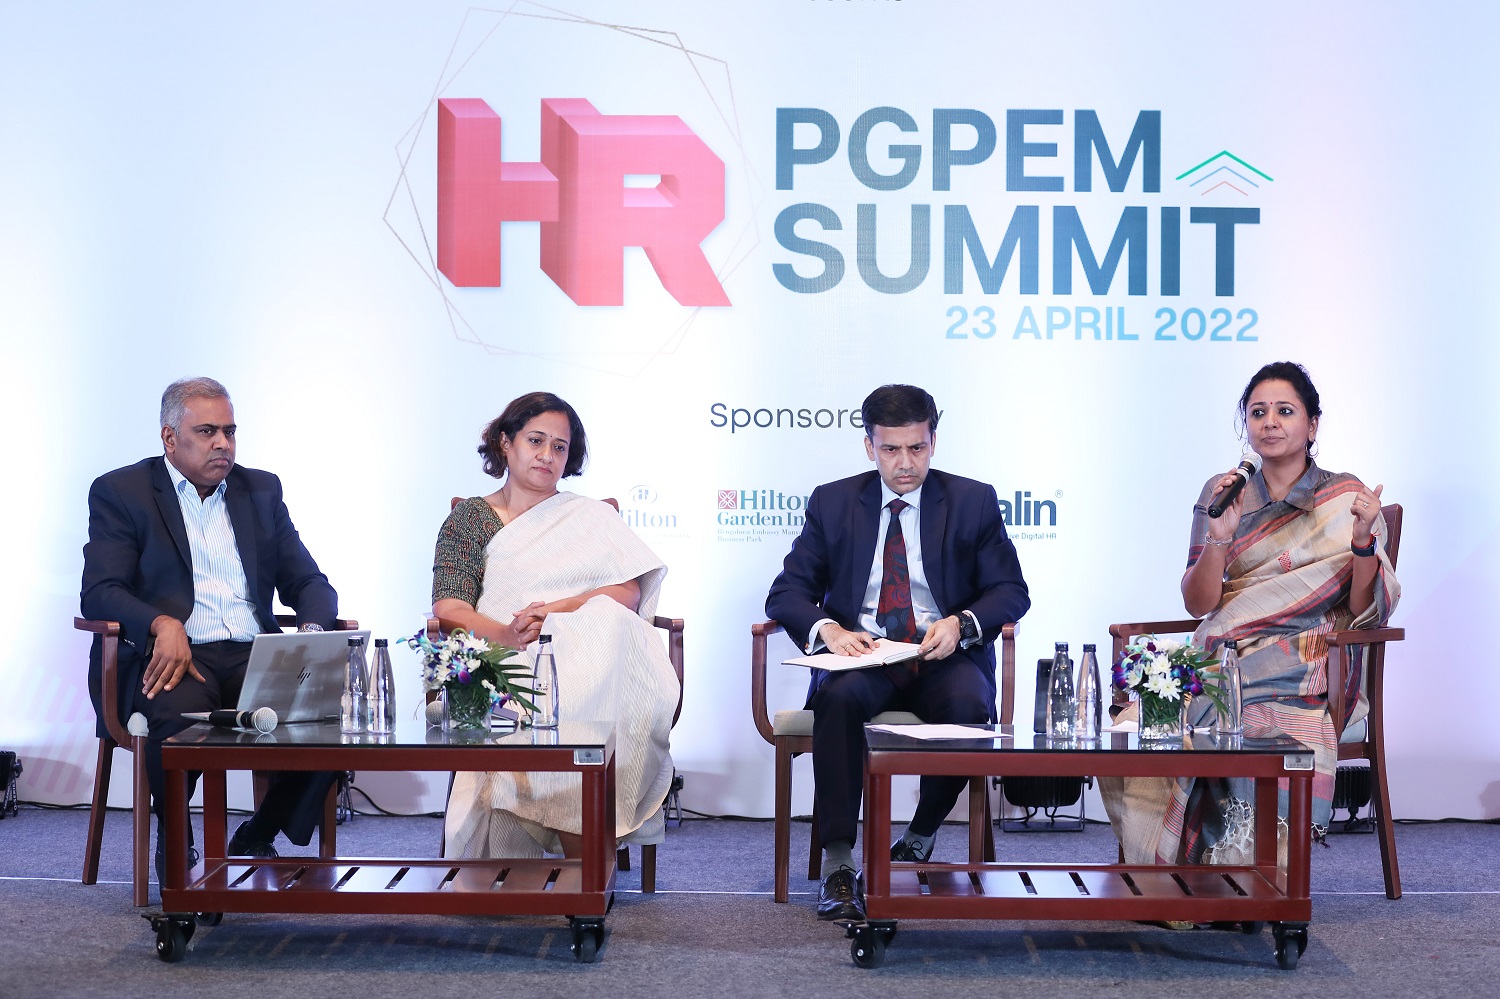 Shubhra Bhandari, HR Leader, Texas Instruments India speaks at the panel discussion on ‘Reinventing talent strategies for future - acquisition, development and retention’. (L-R) Ruben Selvadoray, Group Head - Talent Management; Sonia Kutty - Group HR Head - Quest Global & OD; Dr. Sourav Mukherji, faculty from the Organizational Behavior & Human Resources Management area, IIMB and Shubhra Bhandari.